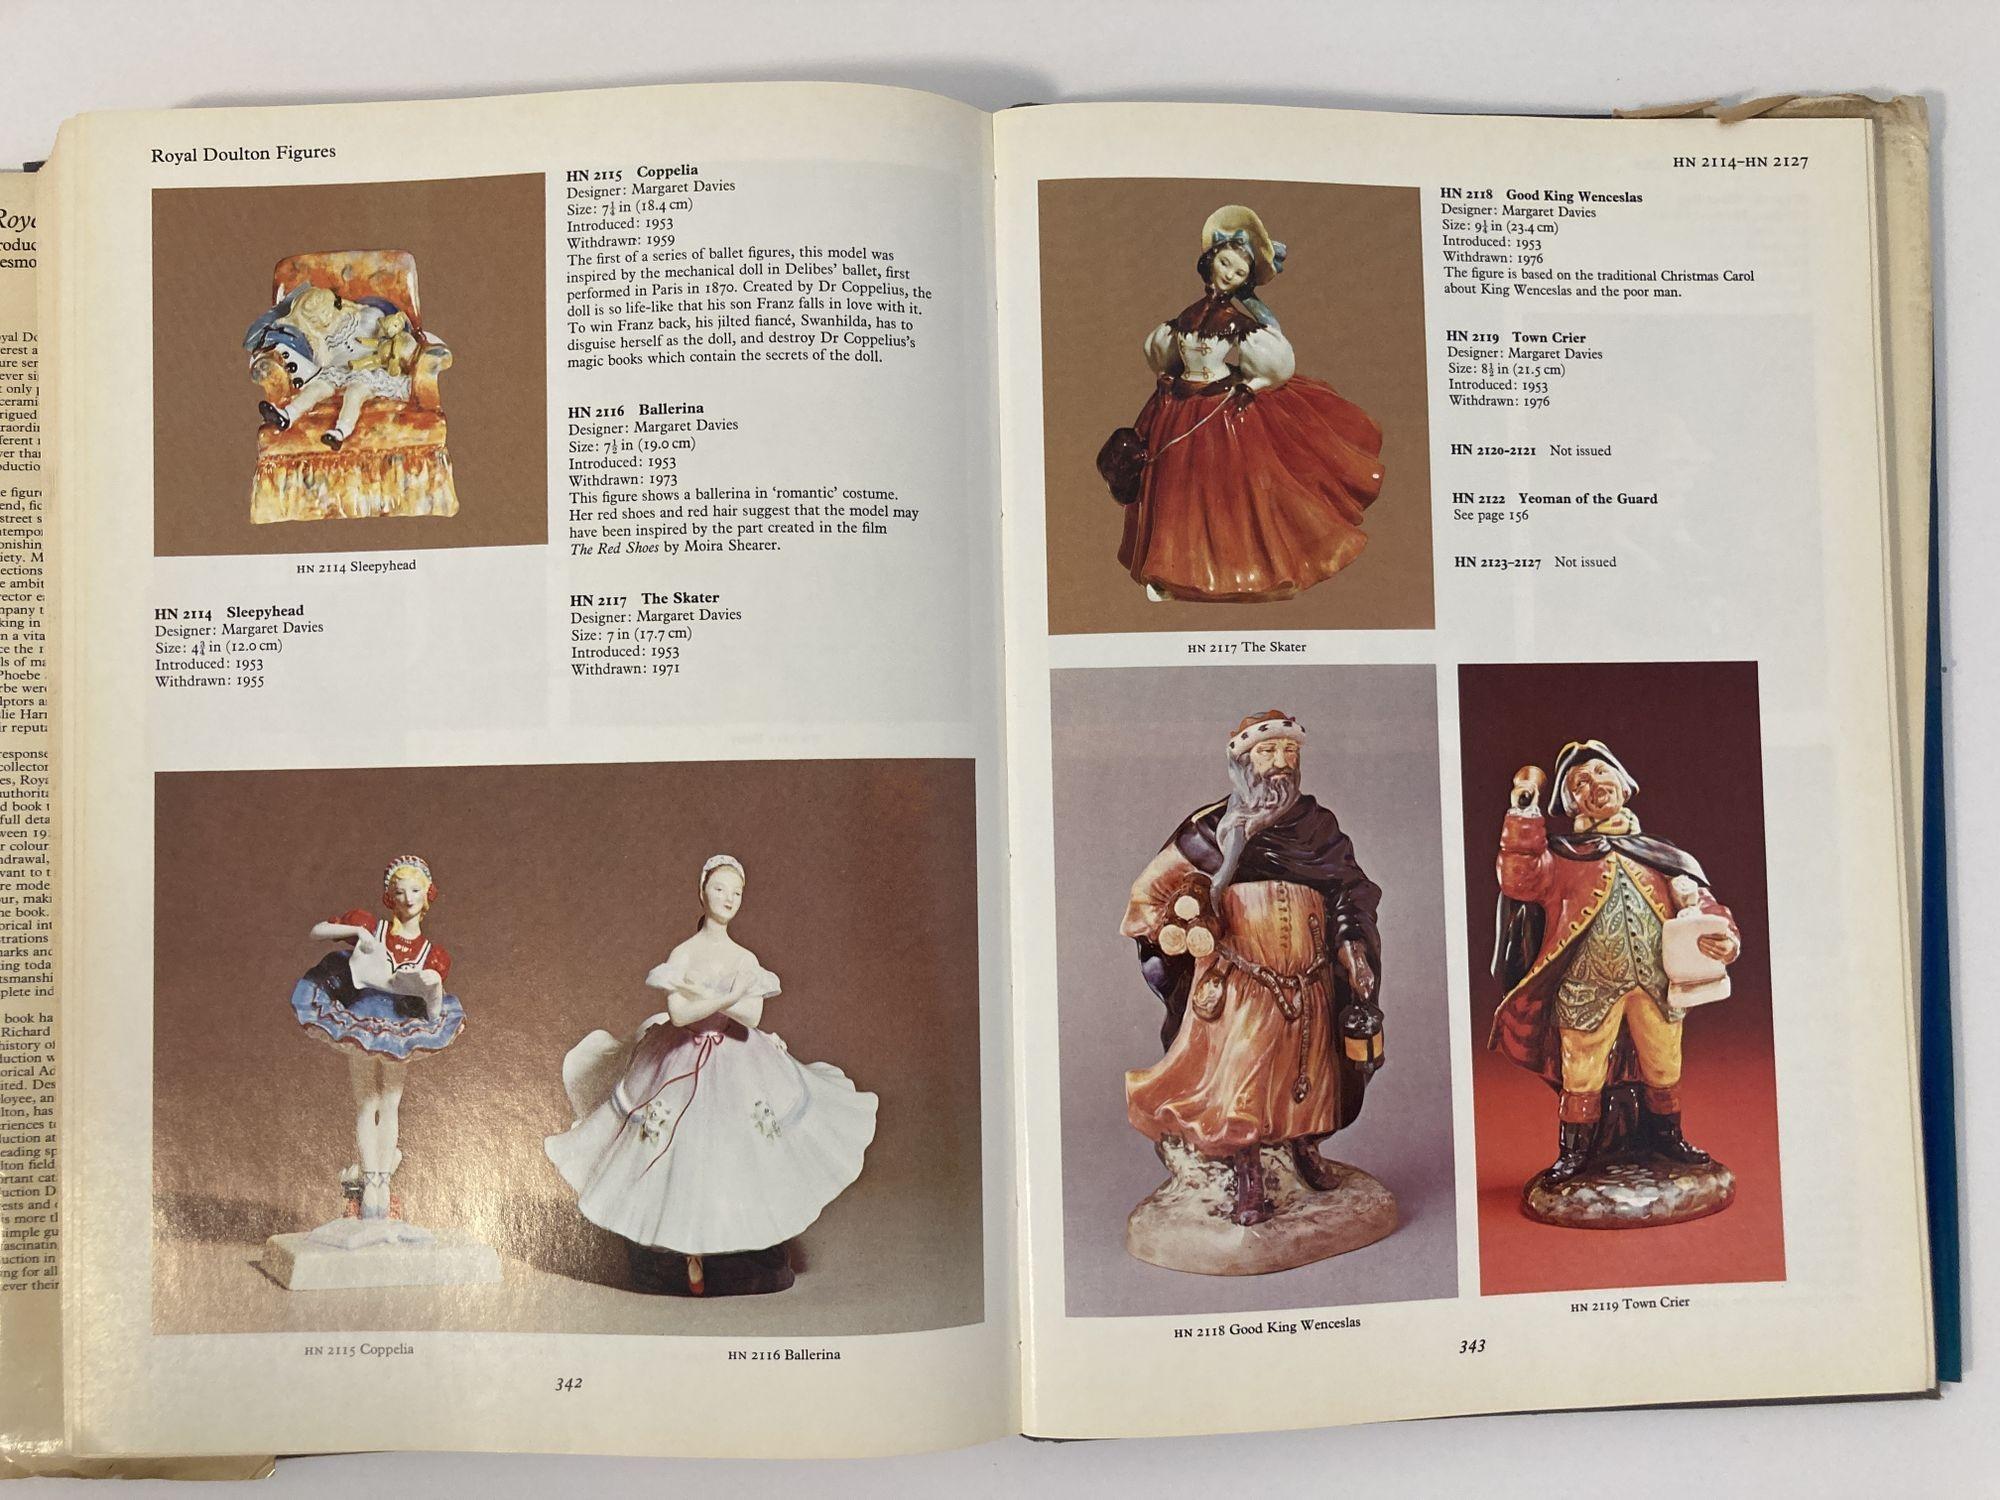 Royal Doulton Figures 1st Ed. Hardcover Book 1979 For Sale 5